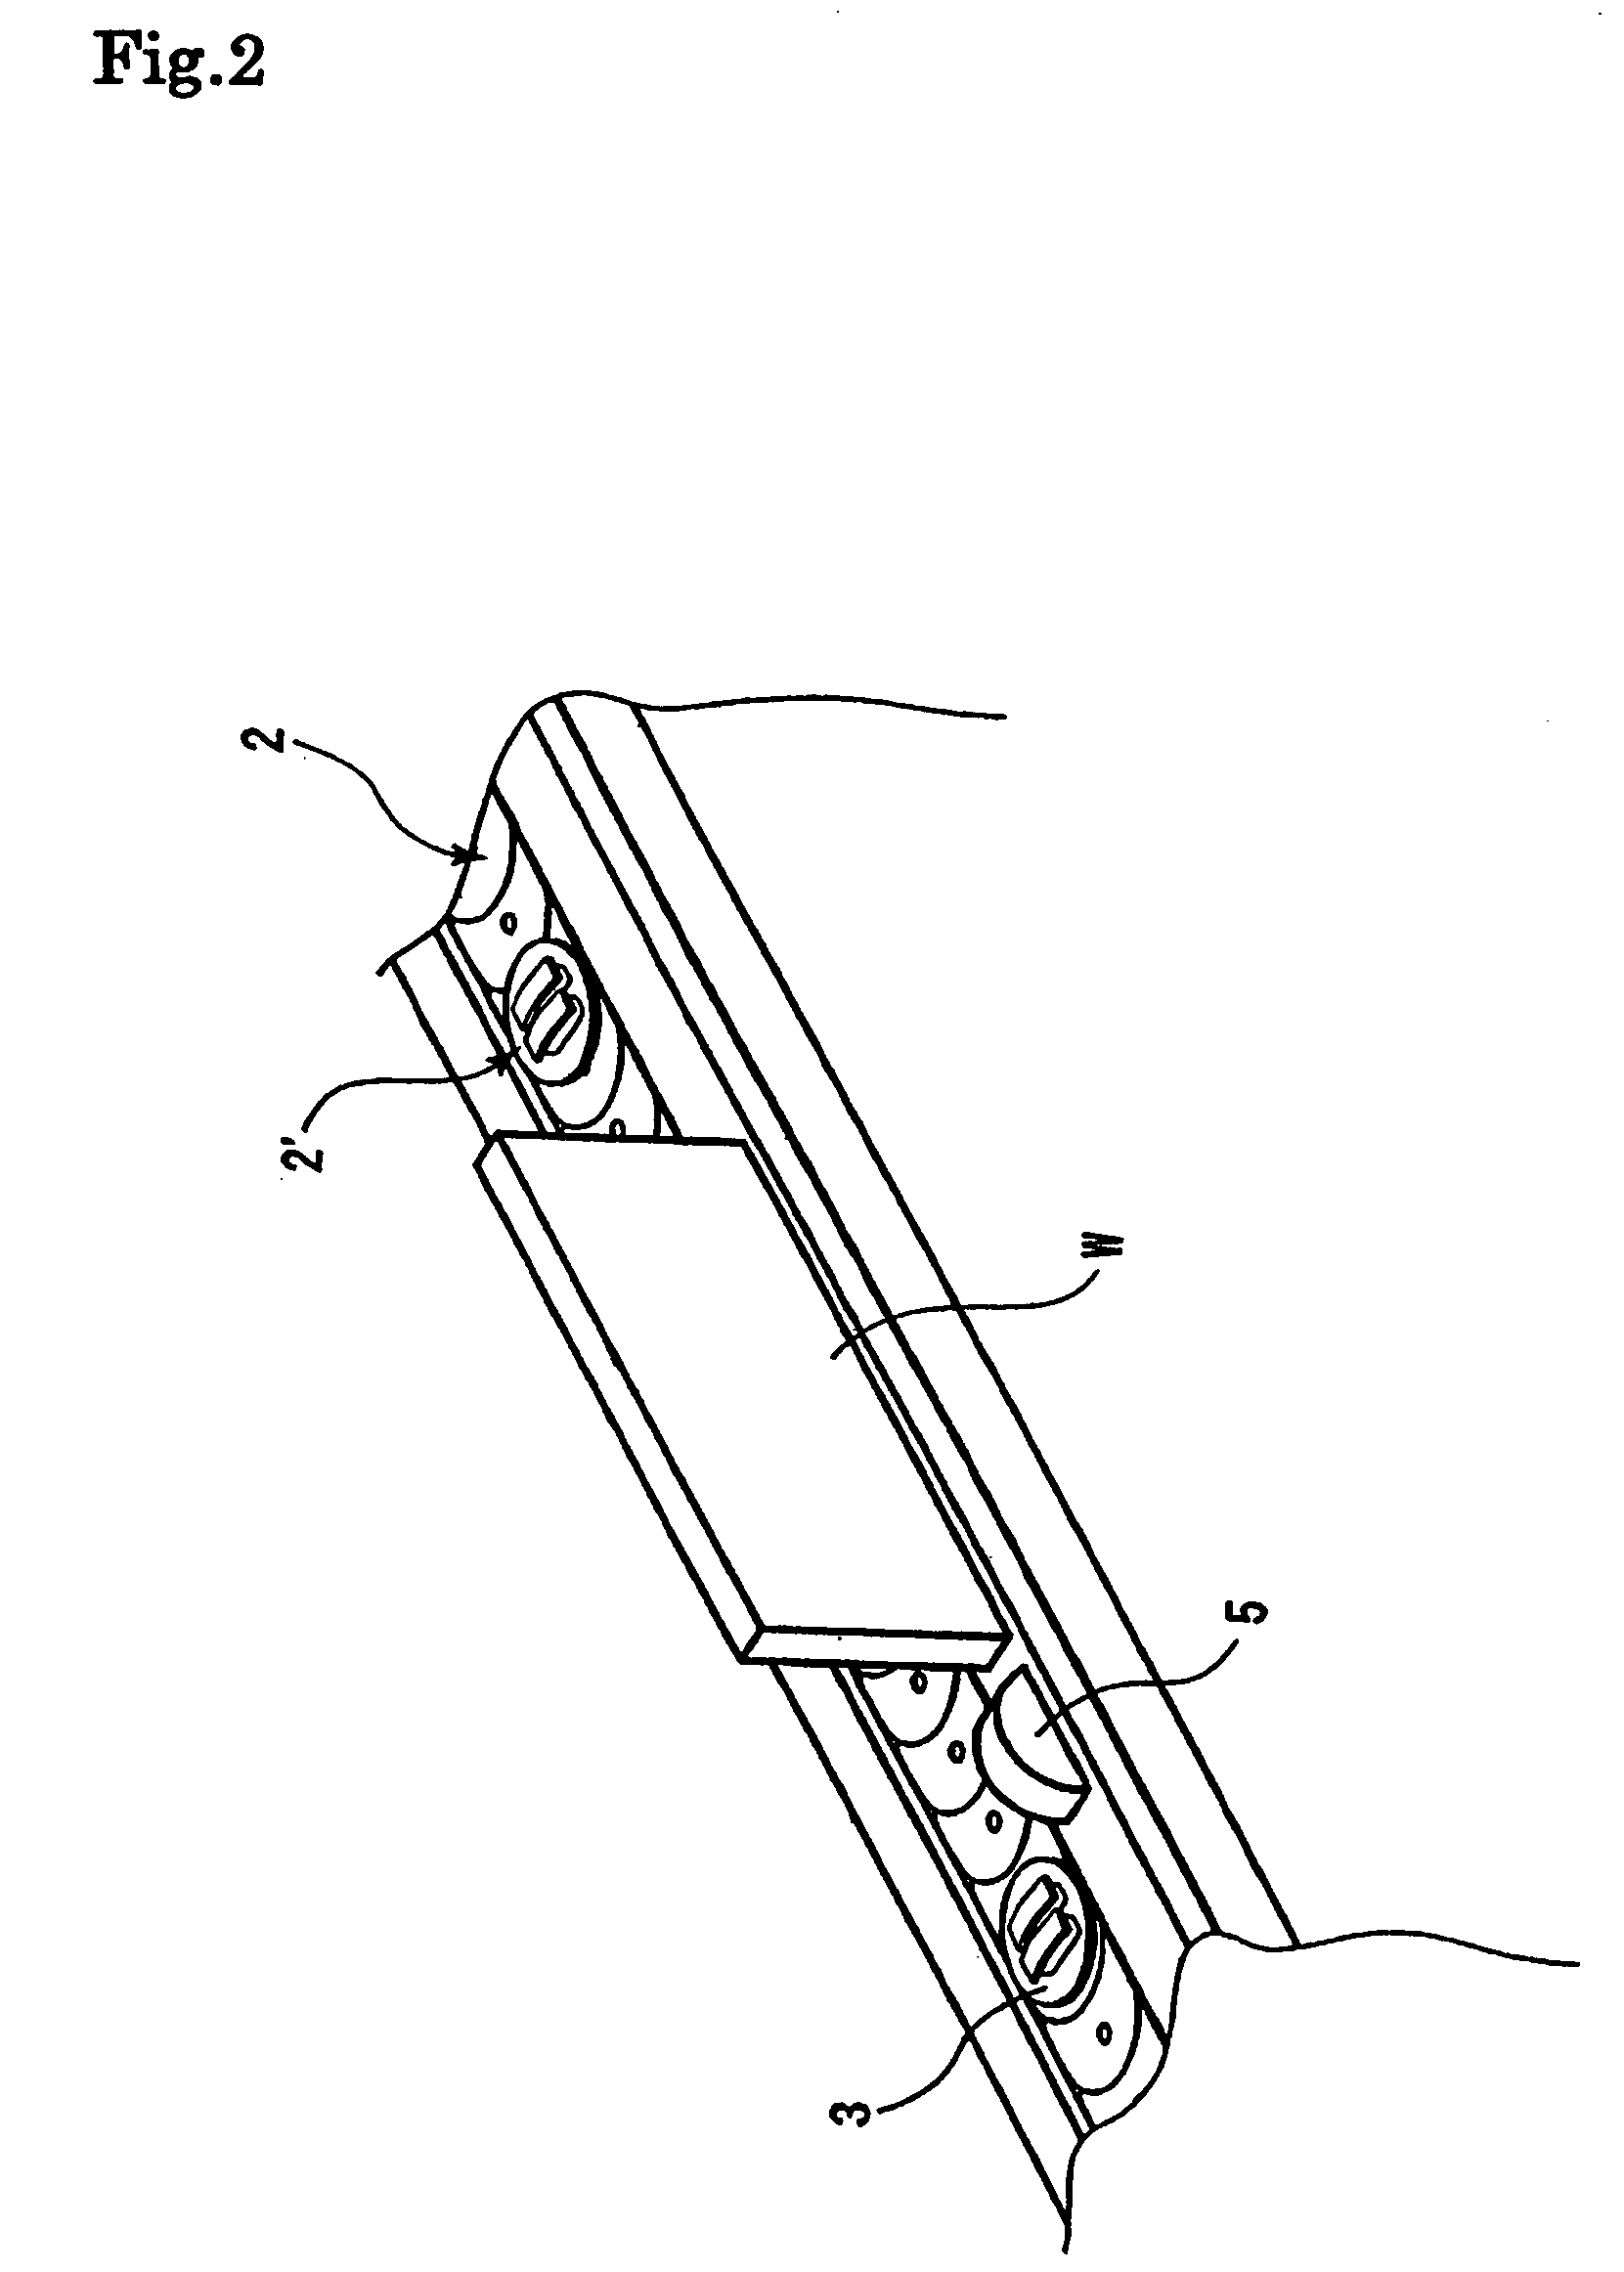 Food and drink managing device in circulation type carrying path